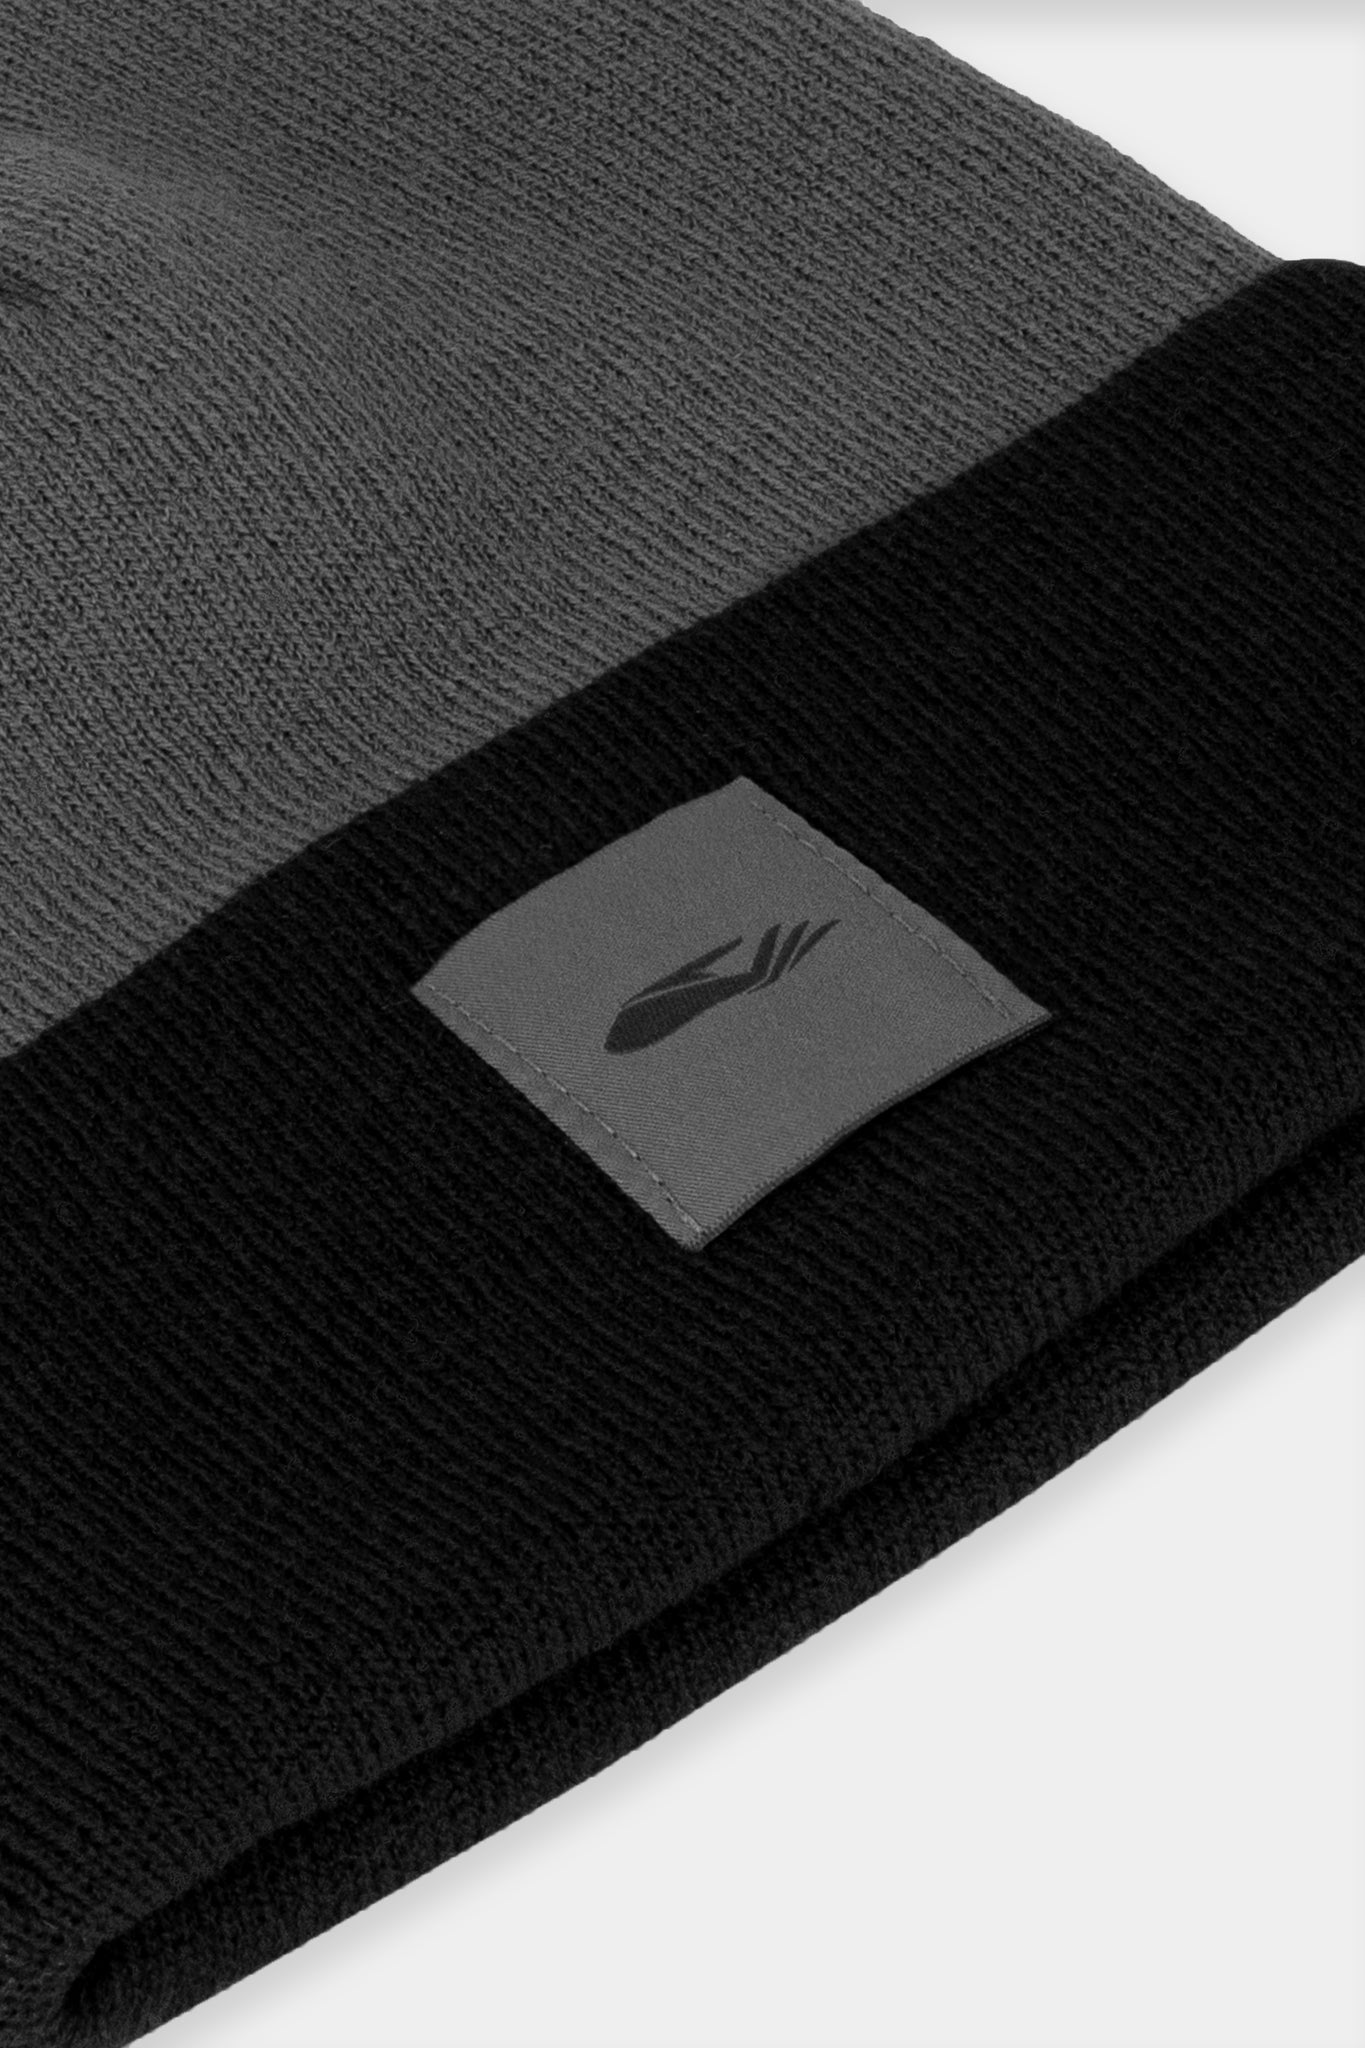 Provide black and grey beanie with hand logo patch stitched on to front (close up)